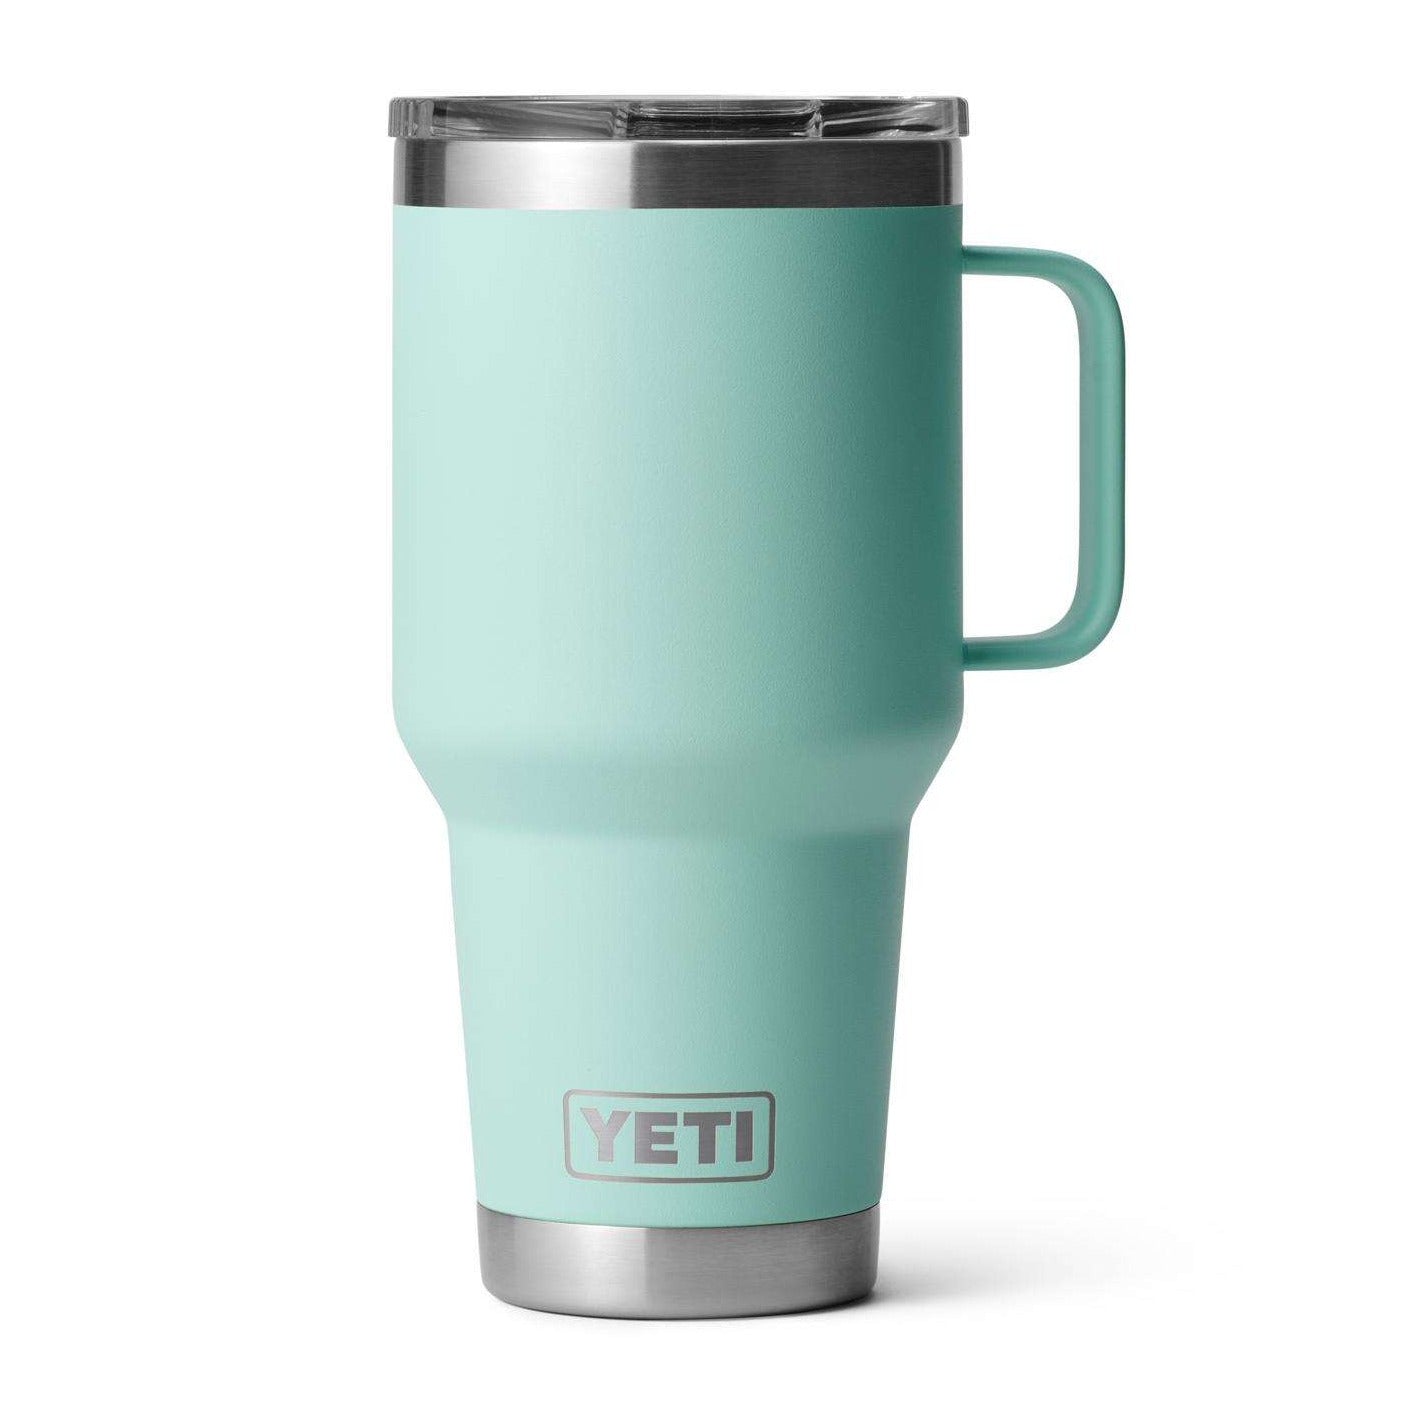 Gordy's Marine on X: #YETI 20 & 30oz Sharptail Taupe Rambler travel mugs  w/stronghold lid are perfect for wintery pot-holed roads - they keep the  liquids in, instead of on you 🙃 #